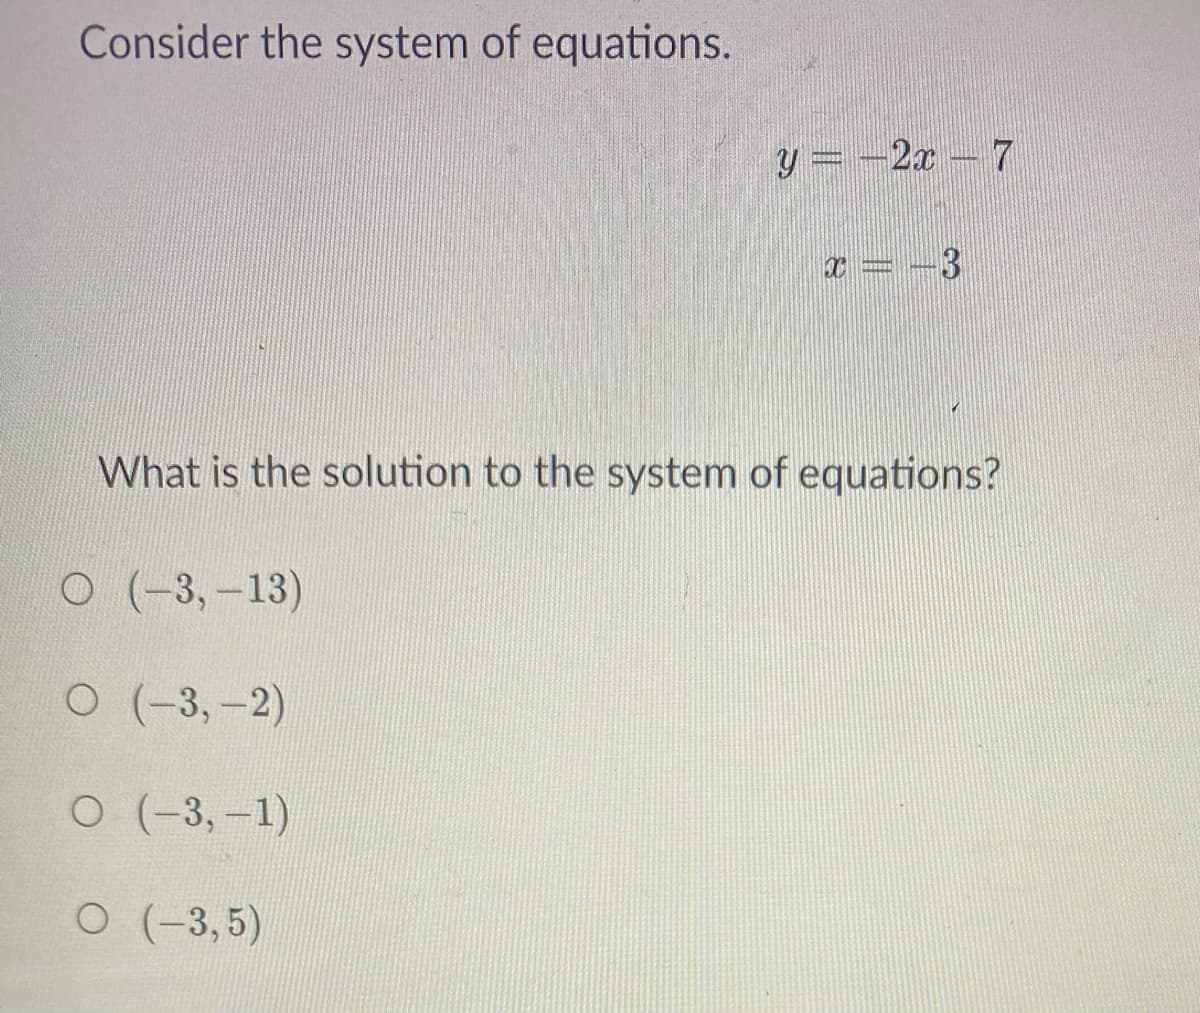 Consider the system of equations.
y = -2x – 7
x = -3
What is the solution to the system of equations?
О (-3, —13)
О (-3, -2)
о (-3, -1)
O (-3, 5)
